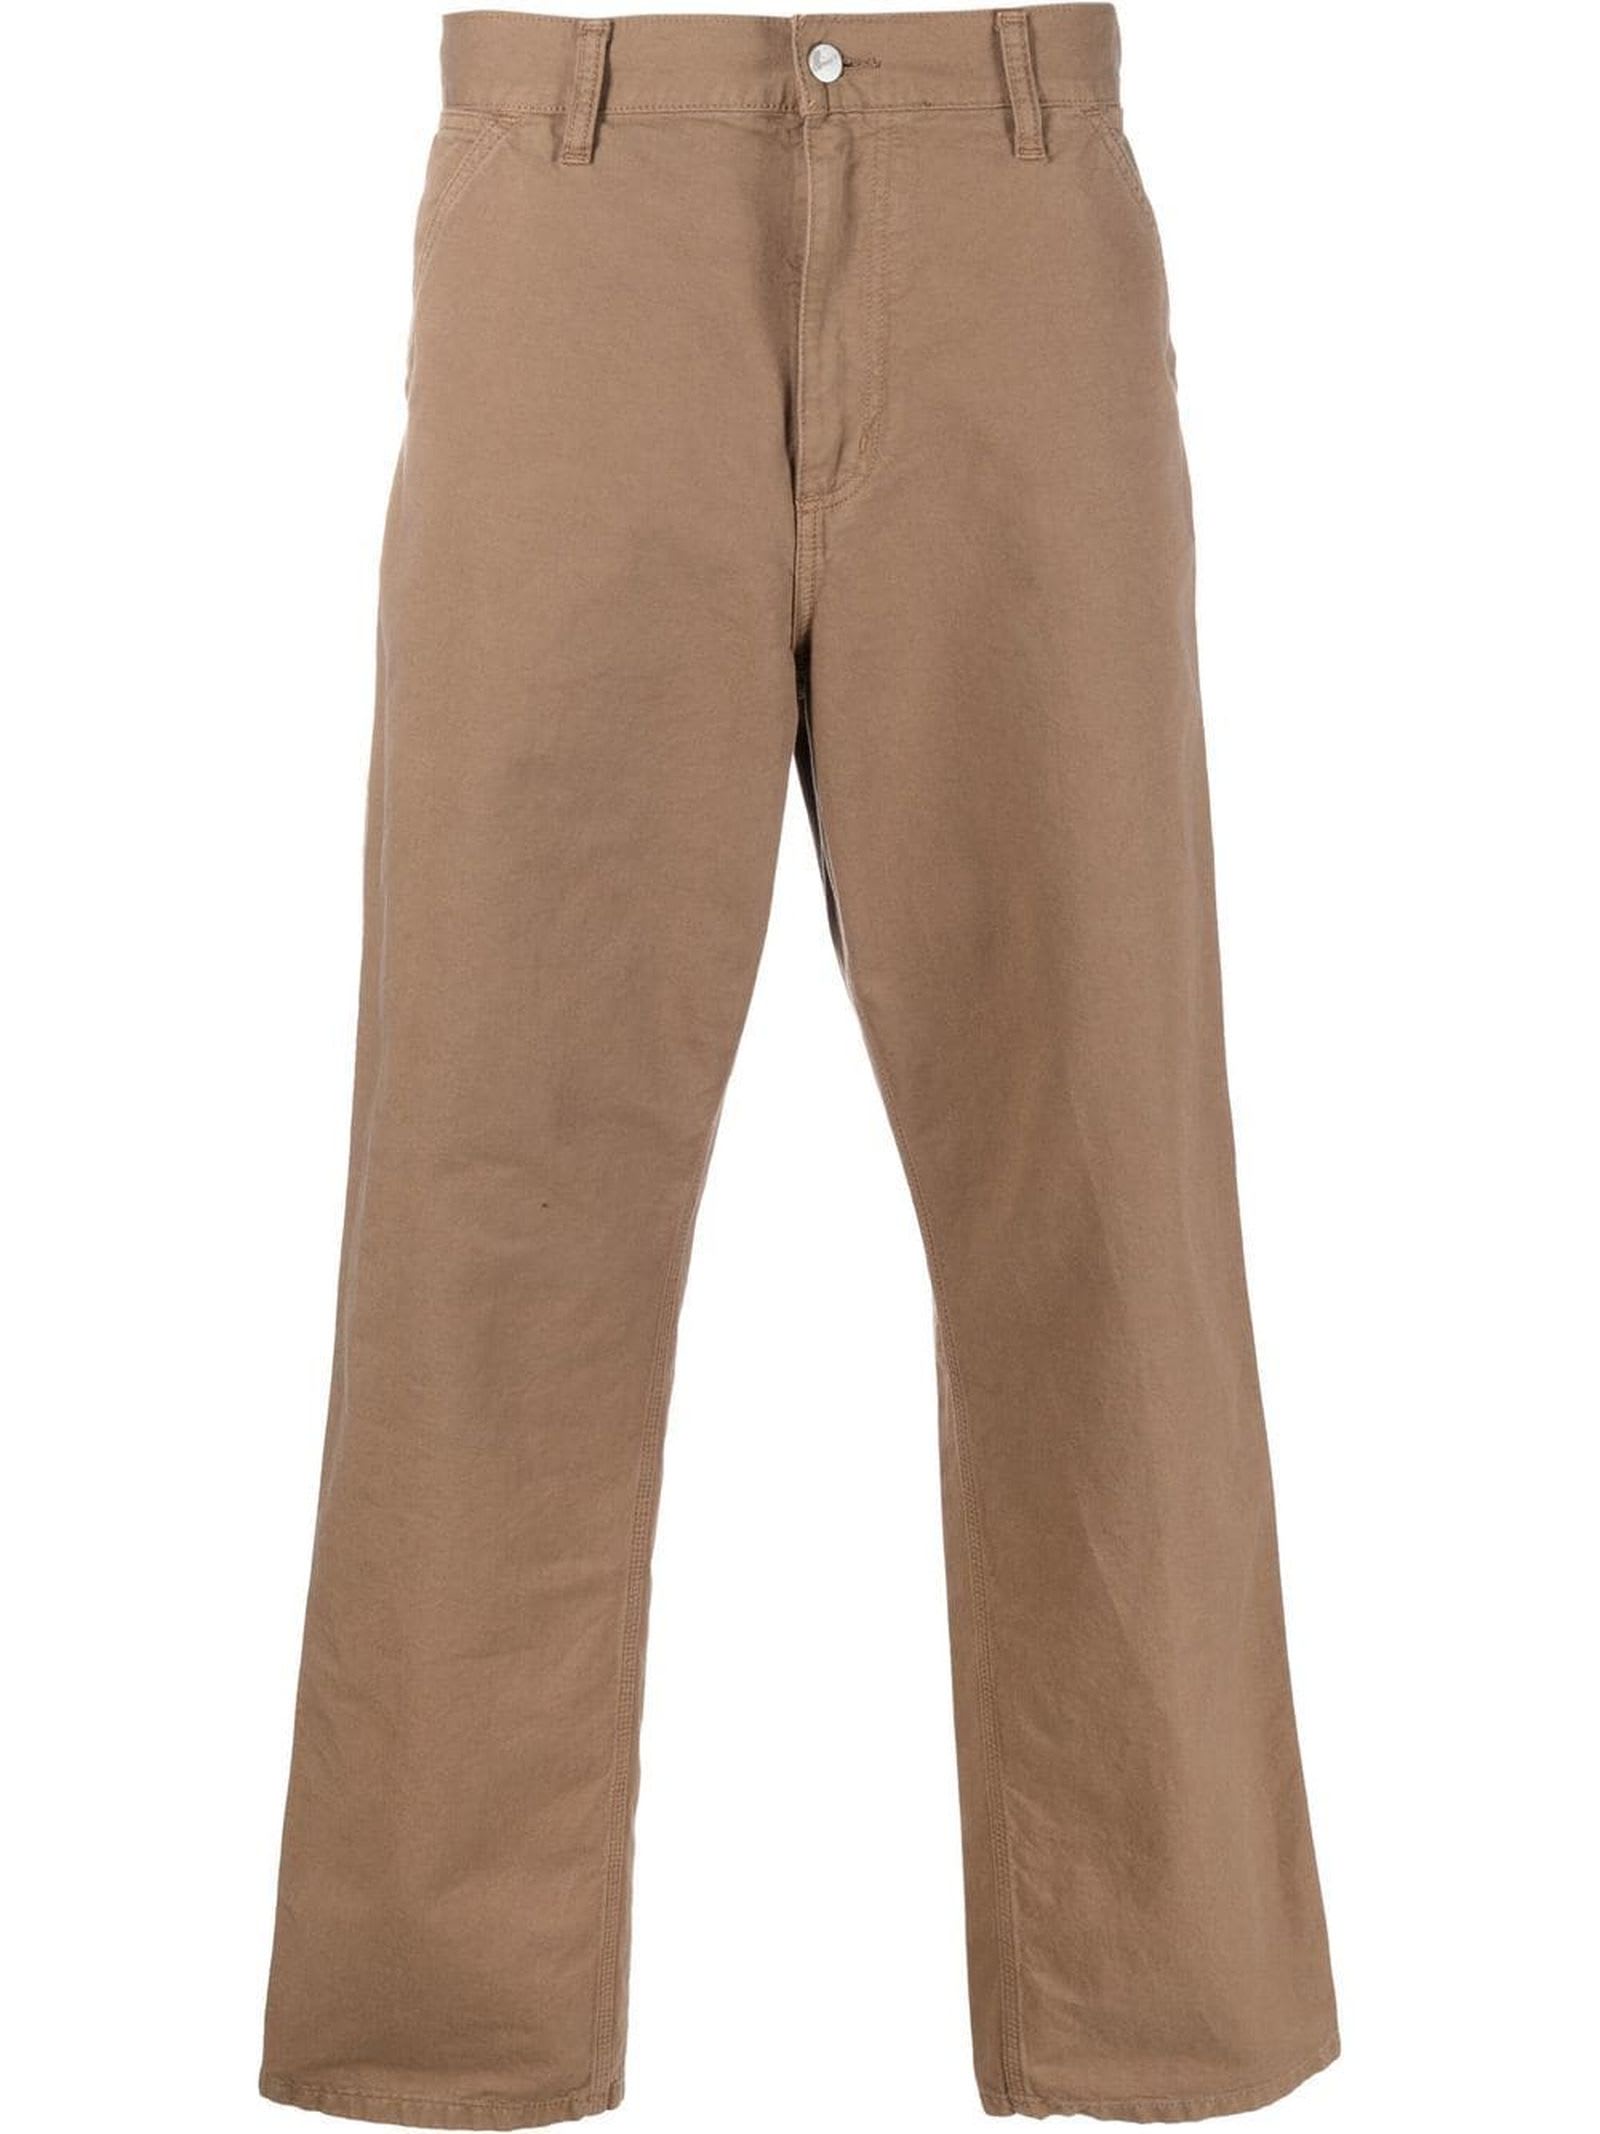 CARHARTT CAMEL BROWN COTTON TROUSERS